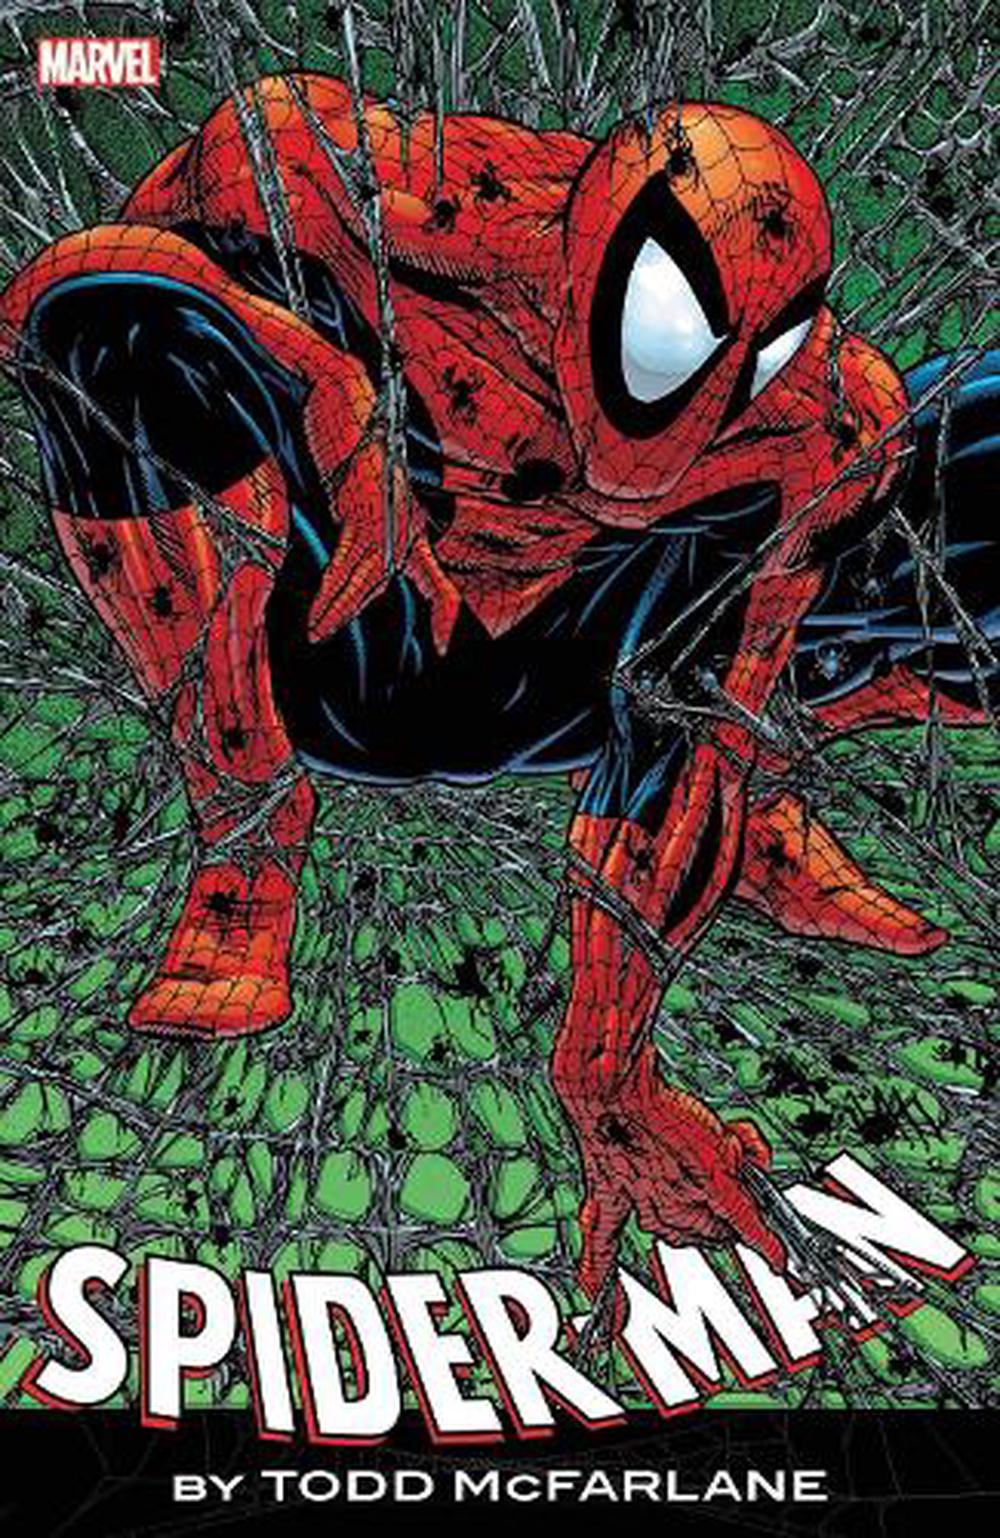 Buy　Spider-man　Paperback,　By　Mcfarlane:　Todd　at　Todd　online　The　Complete　Collection　Nile　by　McFarlane,　9781302923730　The